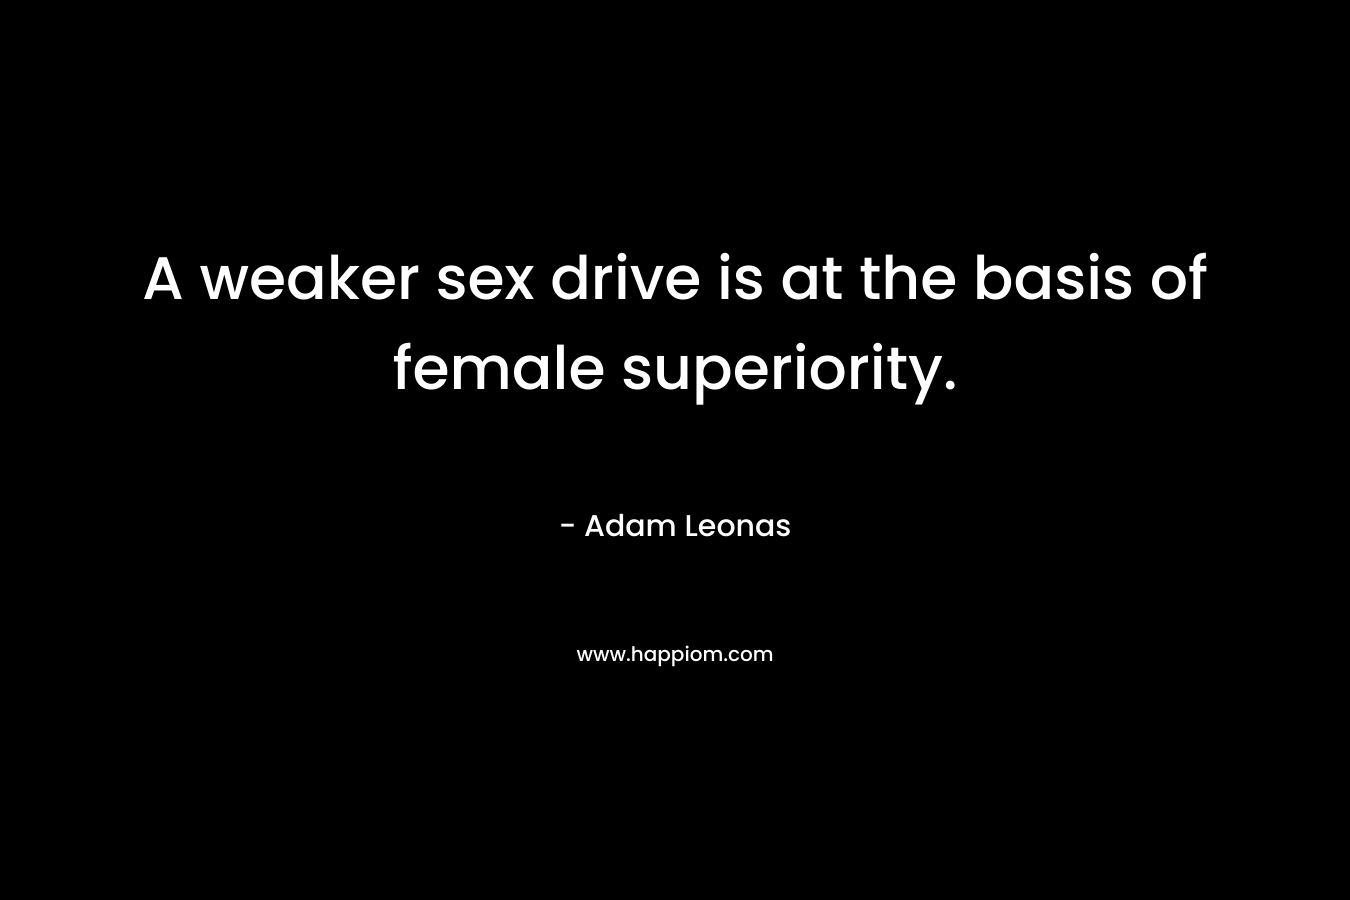 A weaker sex drive is at the basis of female superiority. – Adam Leonas